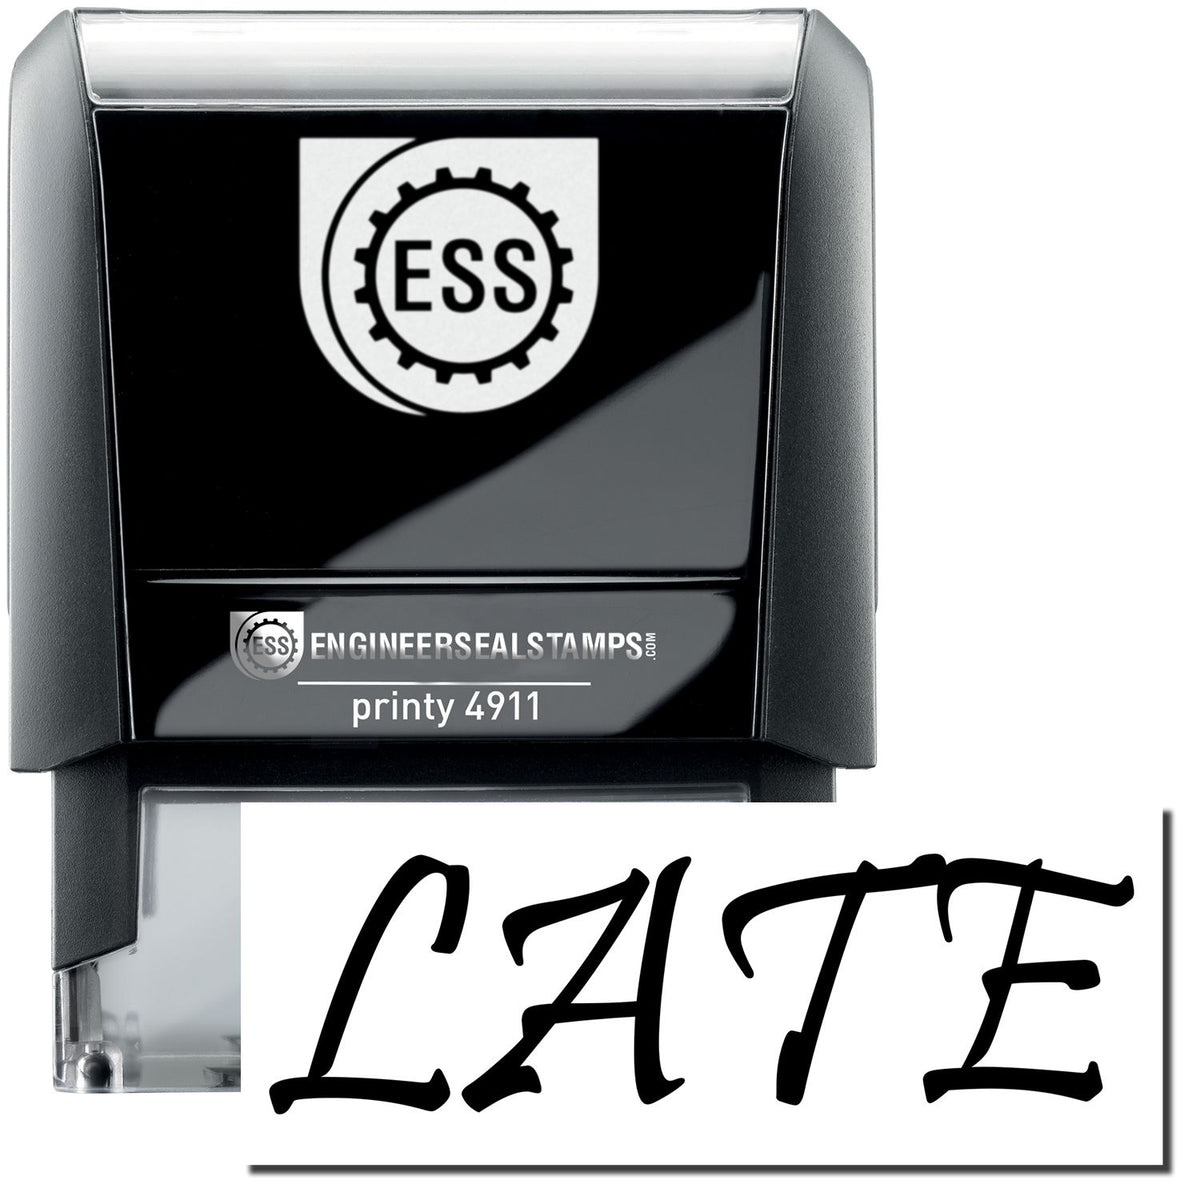 A self-inking stamp with a stamped image showing how the text &quot;LATE&quot; is displayed after stamping.